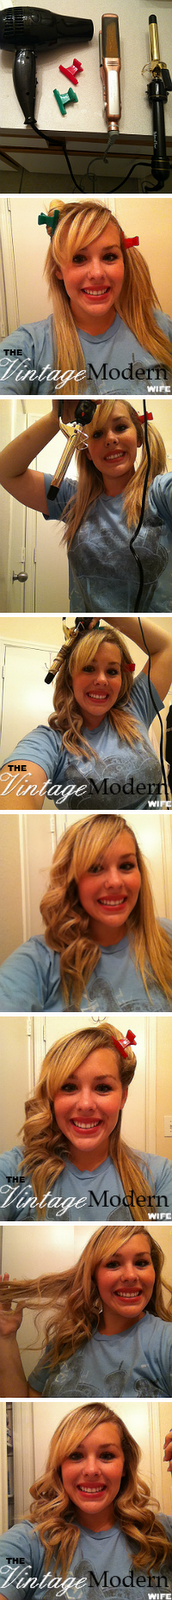 The Vintage Modern Wife- https://www.thevintagemodernwife.com